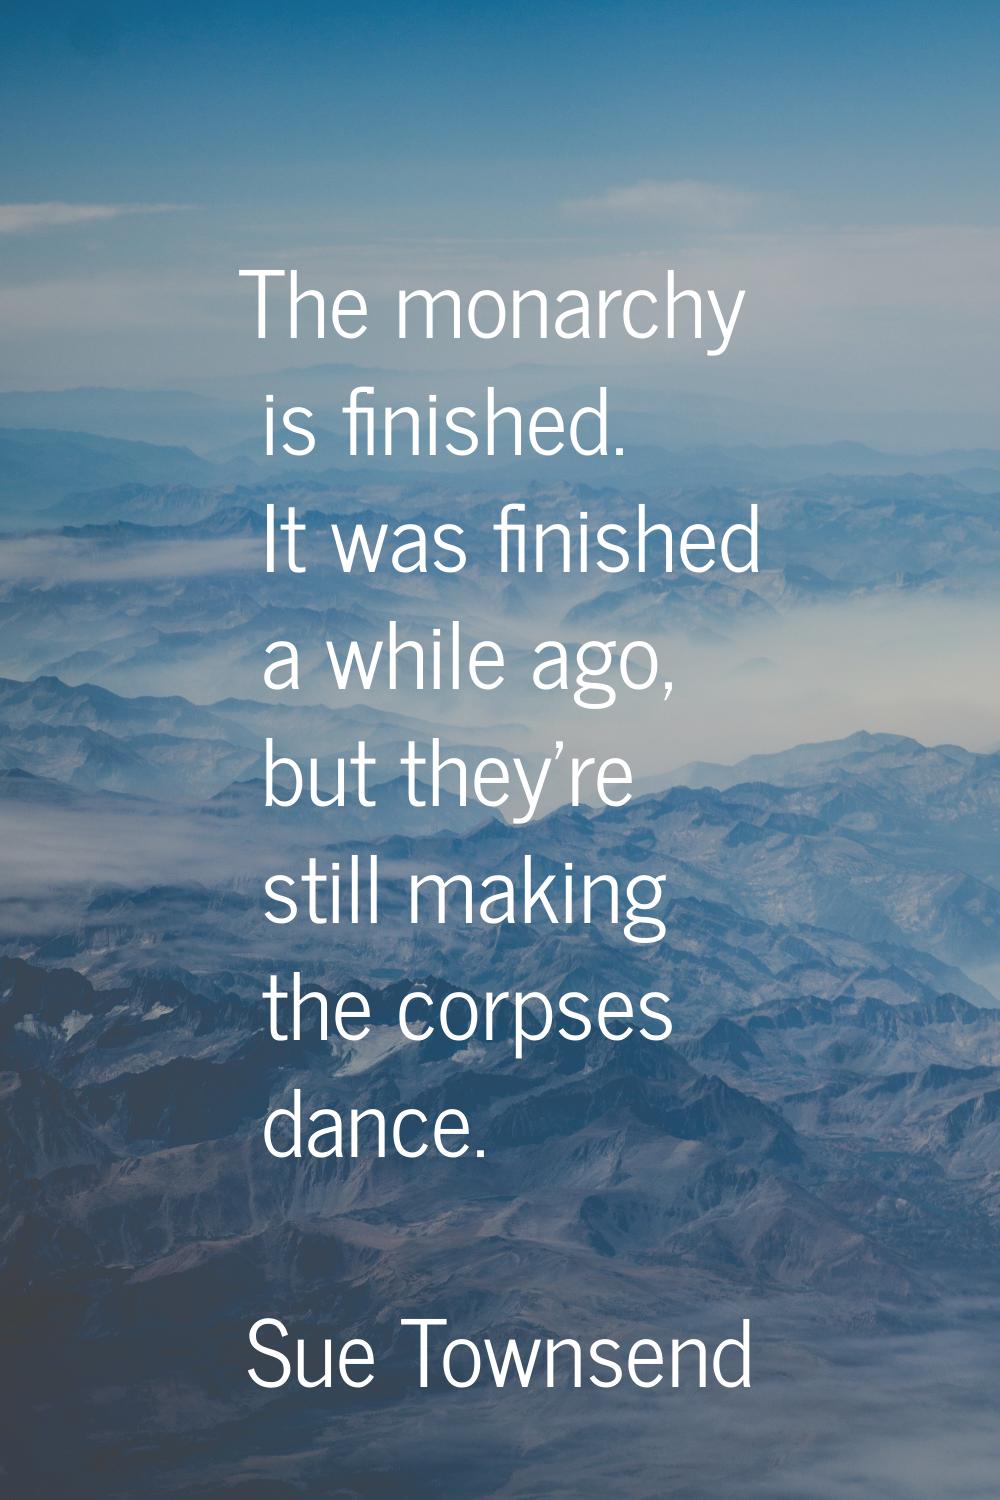 The monarchy is finished. It was finished a while ago, but they're still making the corpses dance.